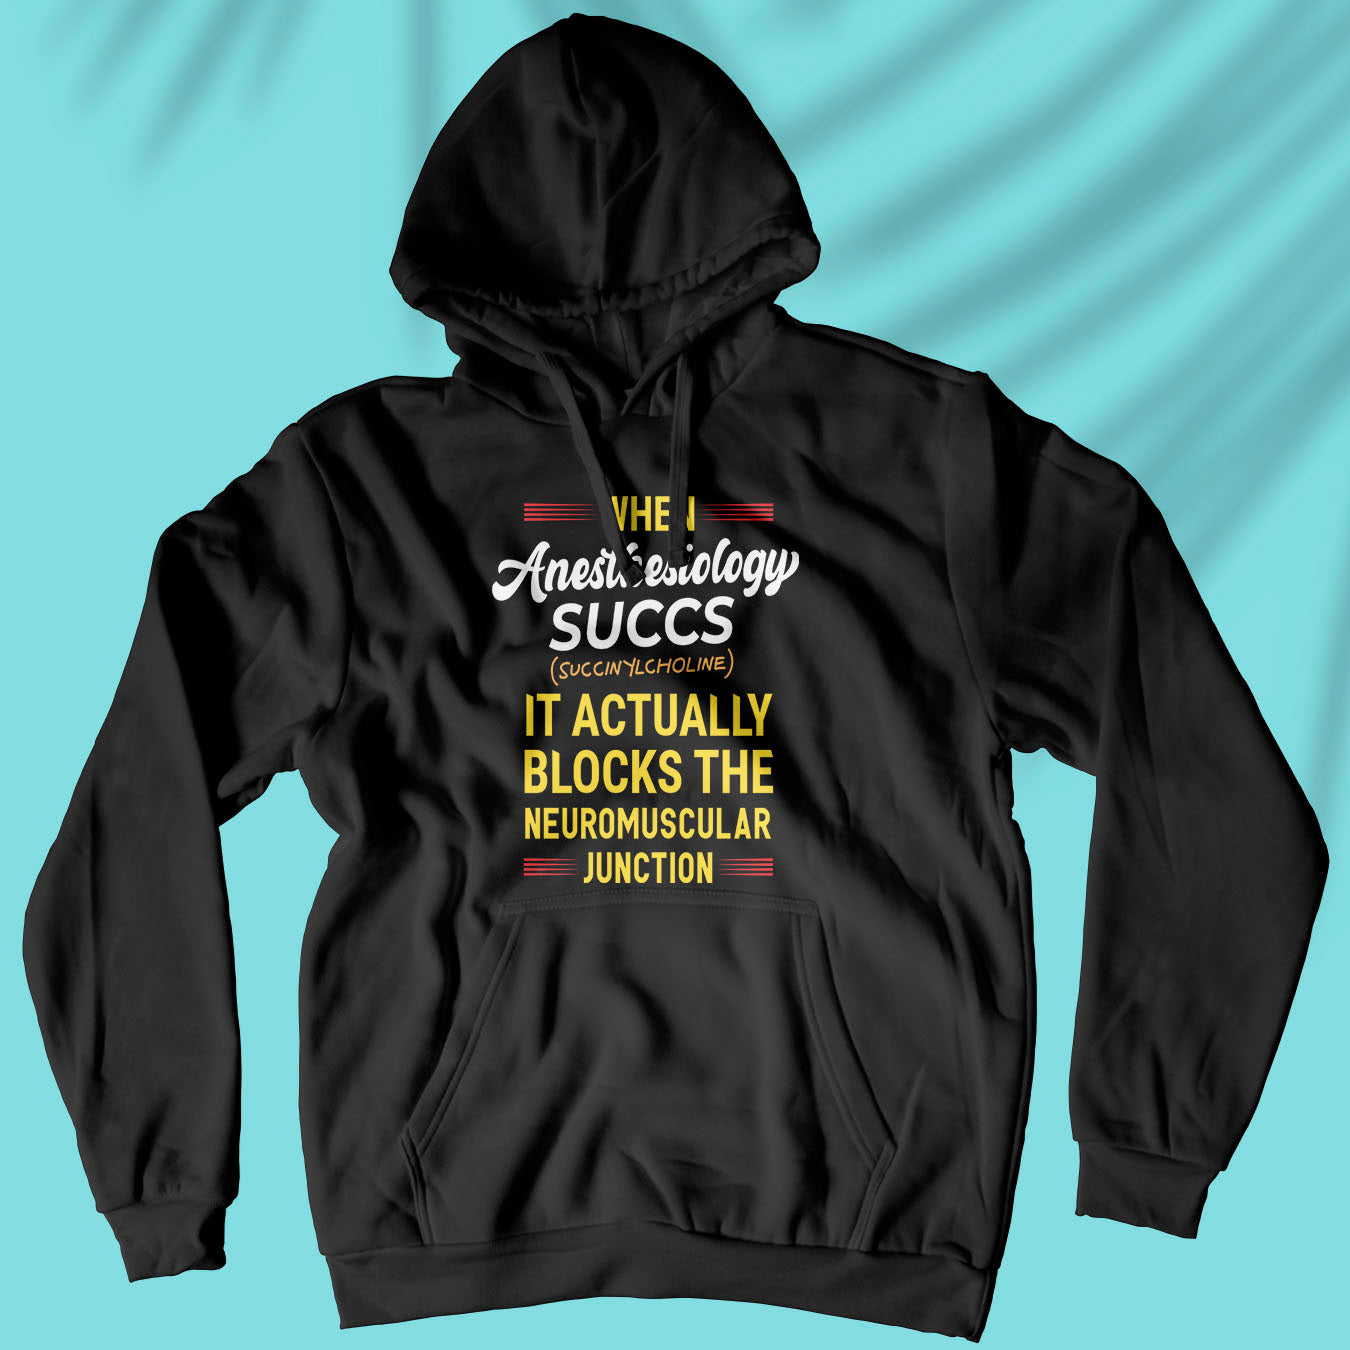 Anesthesiology Succs - Unisex Hoodie